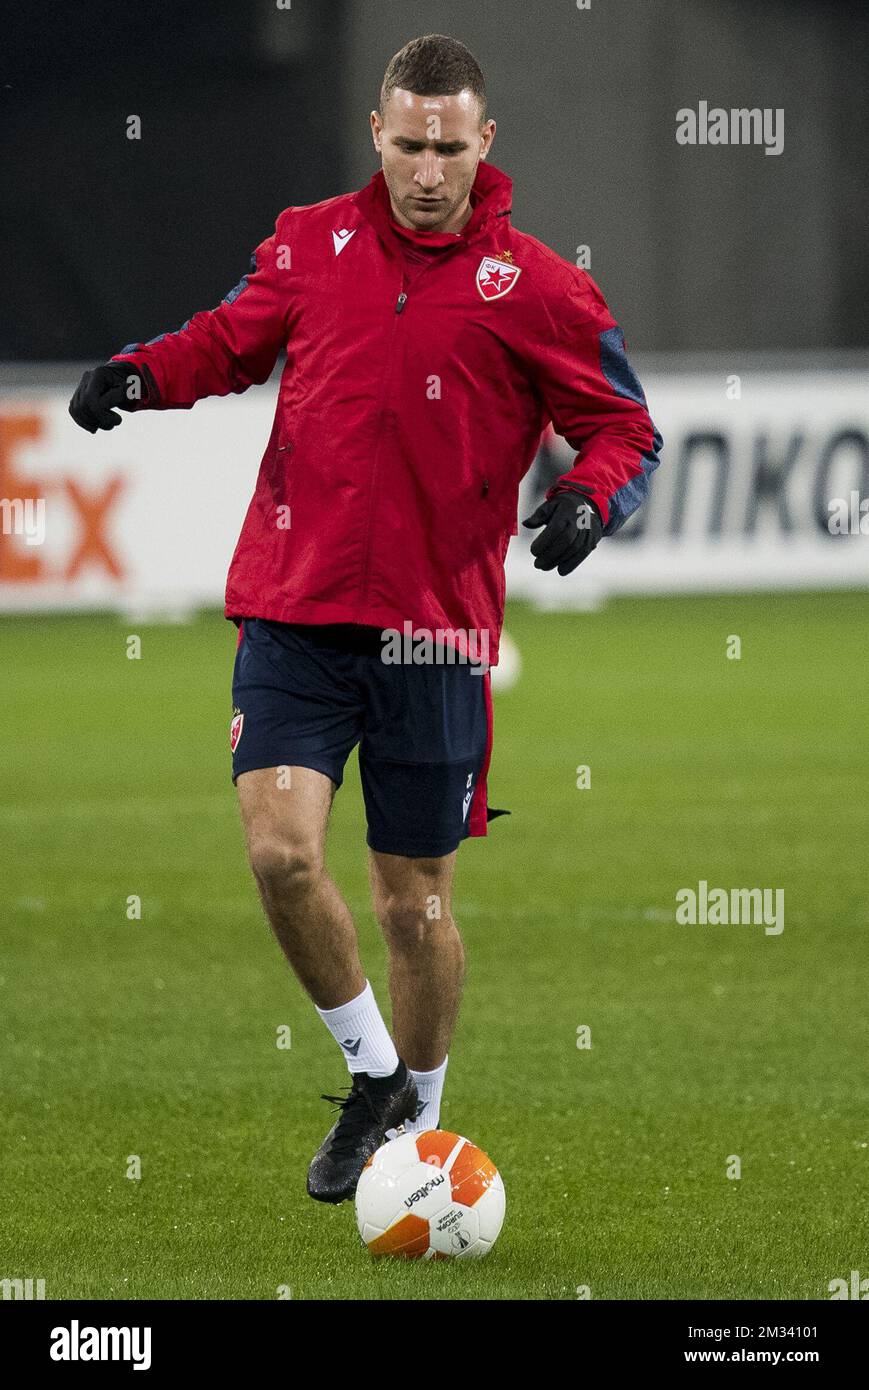 Belgrade's Veljko Simic pictured in action during a training session of Serbian club Crvena Zvezda (Red Star Belgrade), Wednesday 25 November 2020, in Gent. Tomorrow KAA Gent will meet Serbian club Crvena Zvezda in the fourth day of the group phase (group L) of the UEFA Europa League competition. BELGA PHOTO JASPER JACOBS Stock Photo